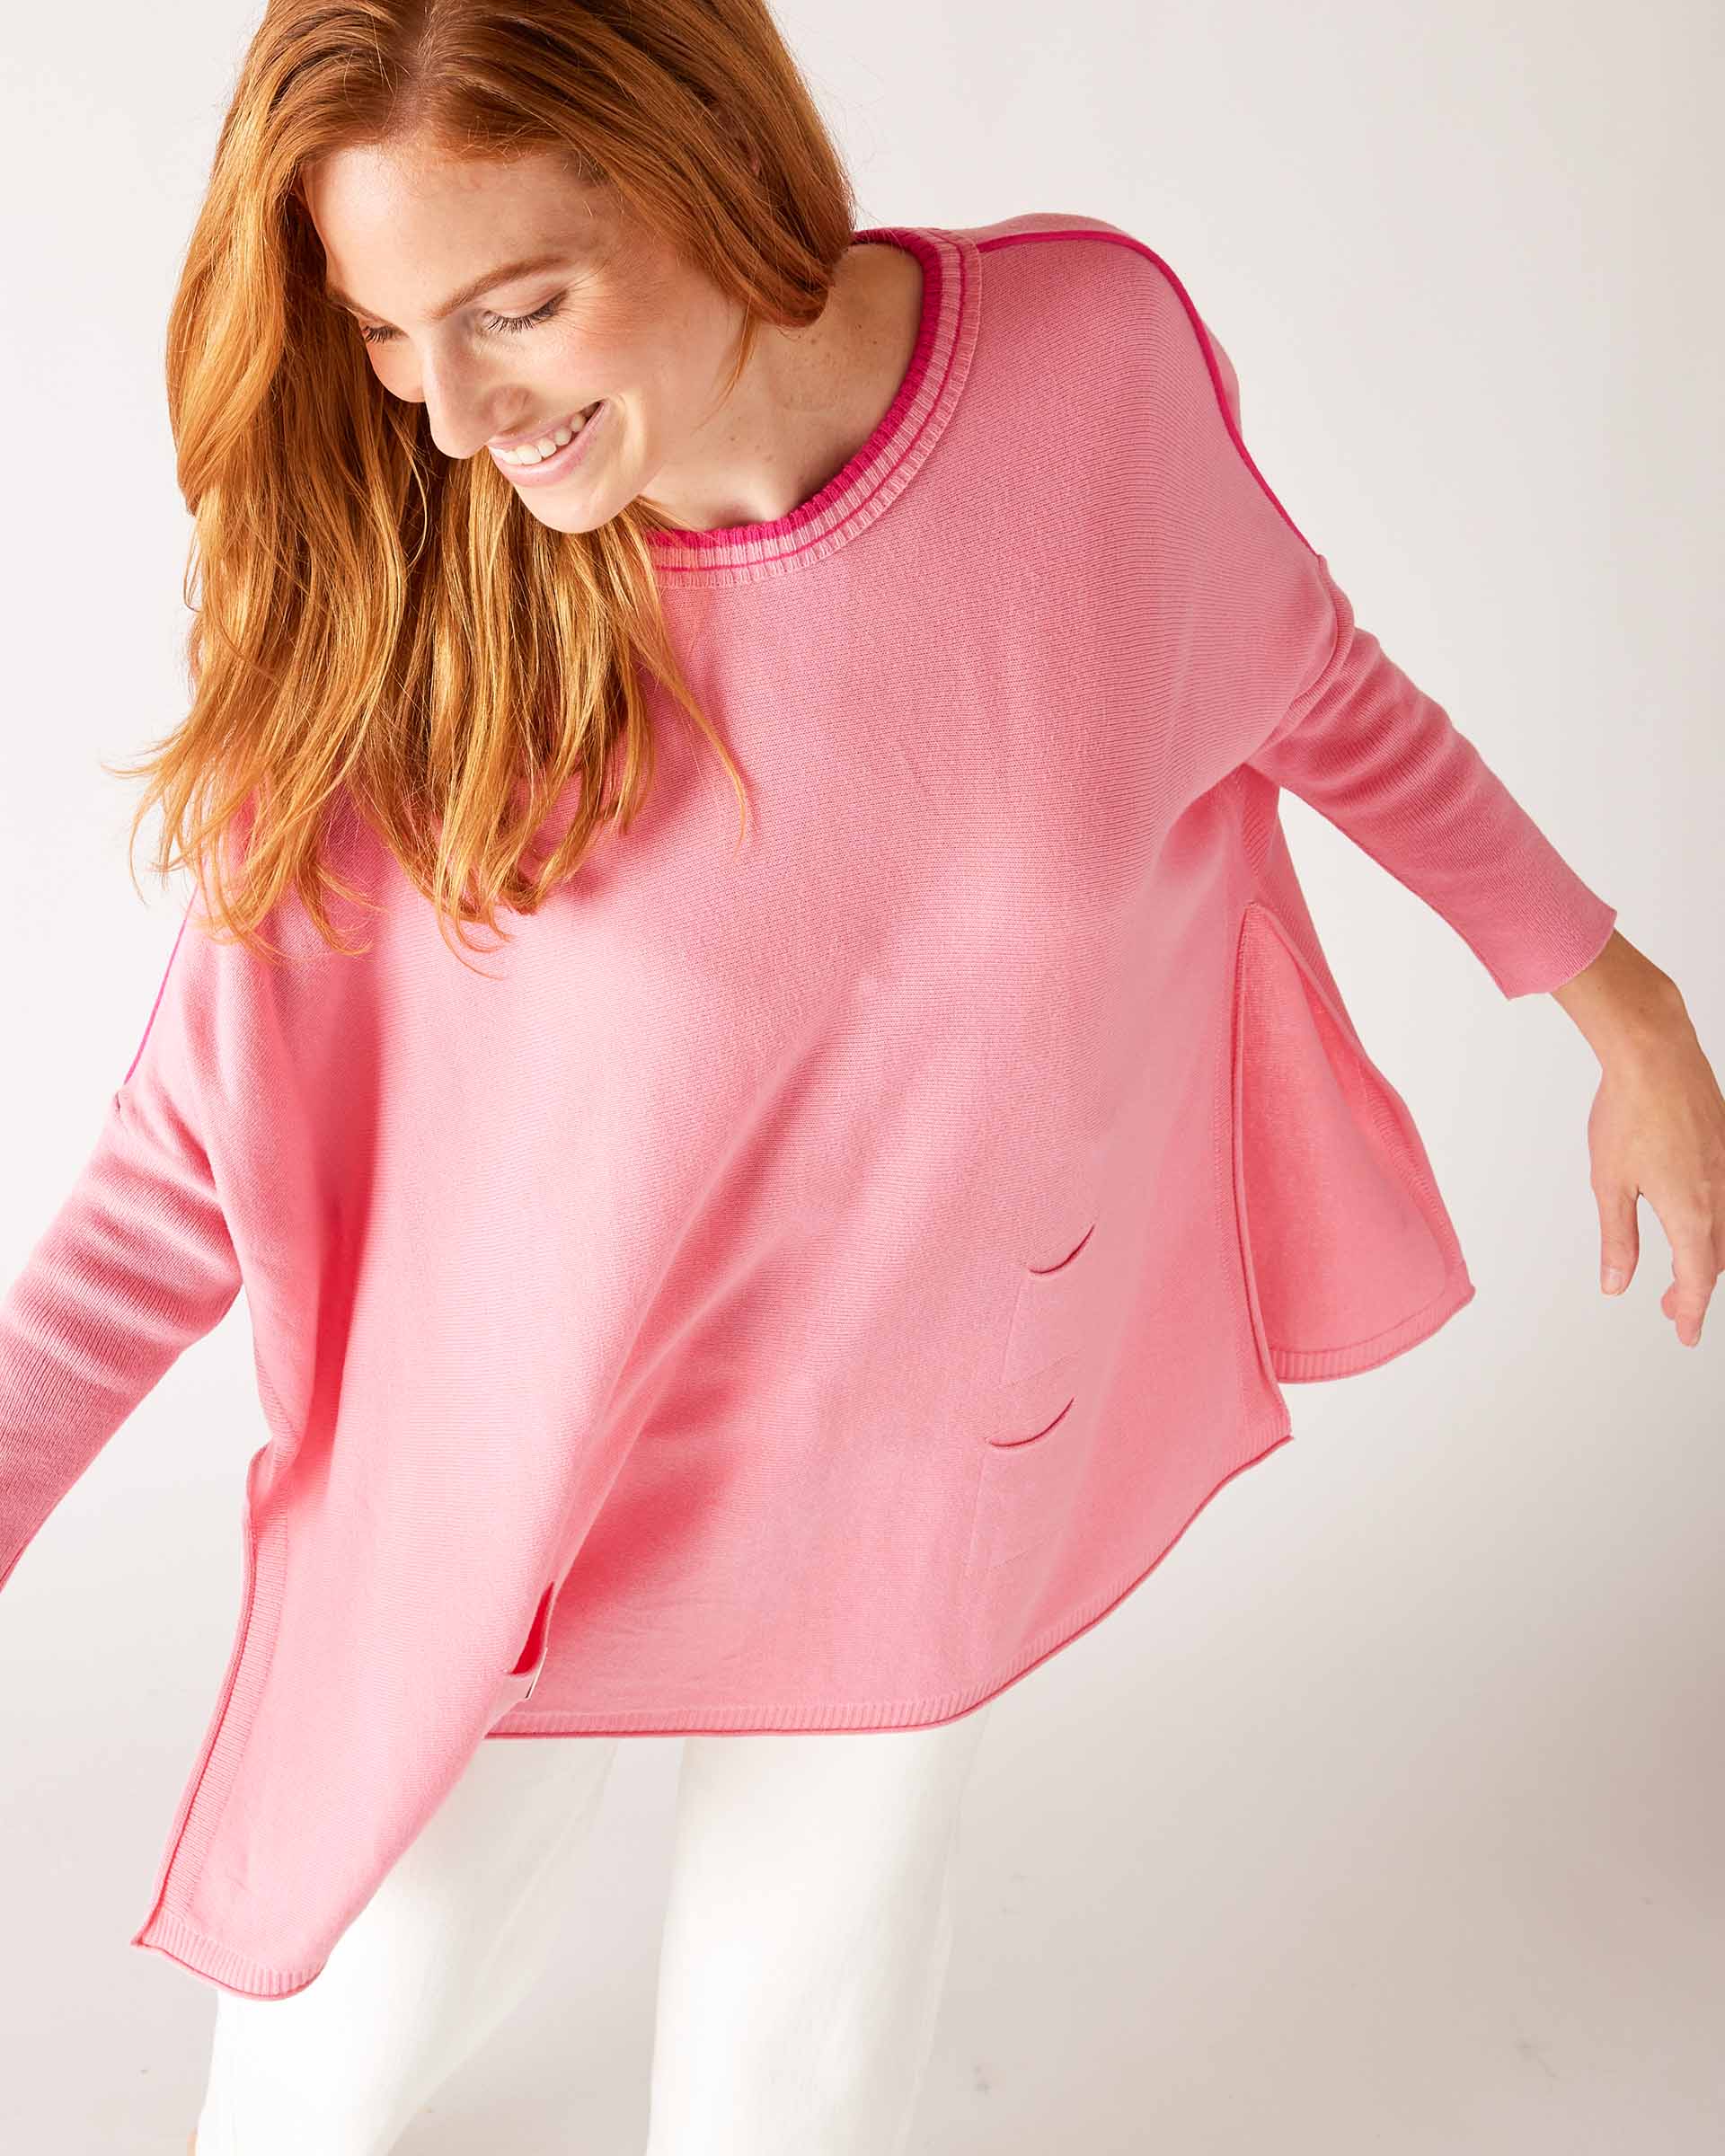 Women's Oversized Crewneck Knit Sweater in Pink Contrast Shoulder View